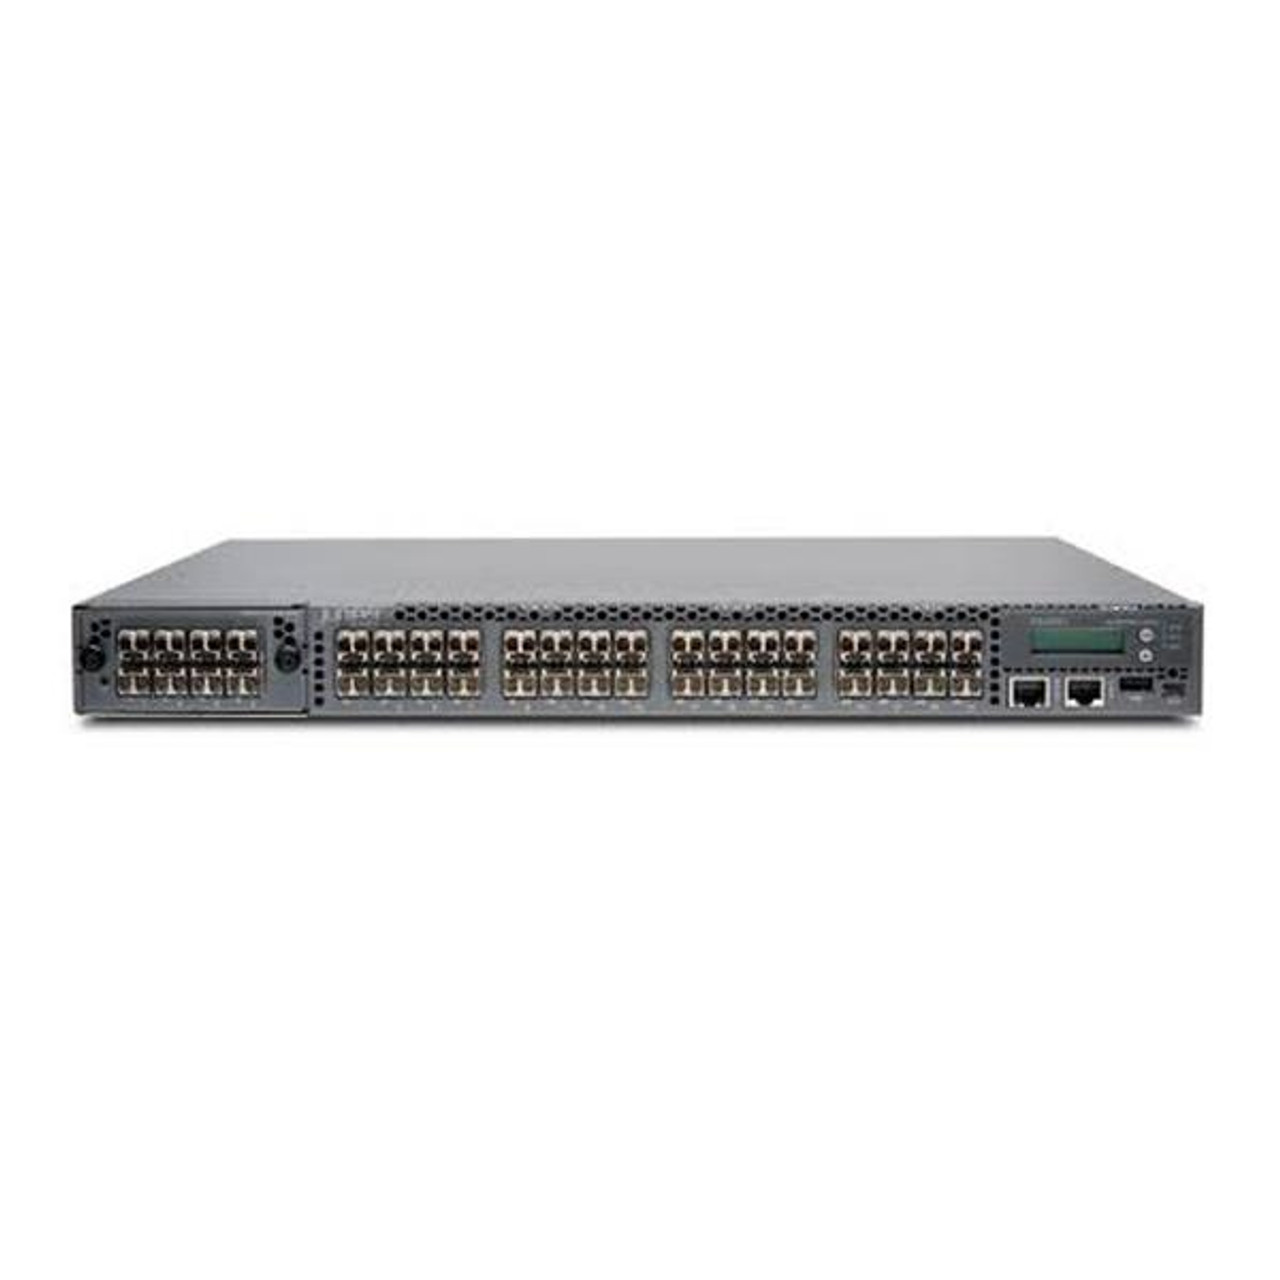 750-045402 Juniper EX4550 32-Ports 1/10G SFP+ Converged Switch 650W DC PS PSU side to Built in Port Side air flow (Refurbished)